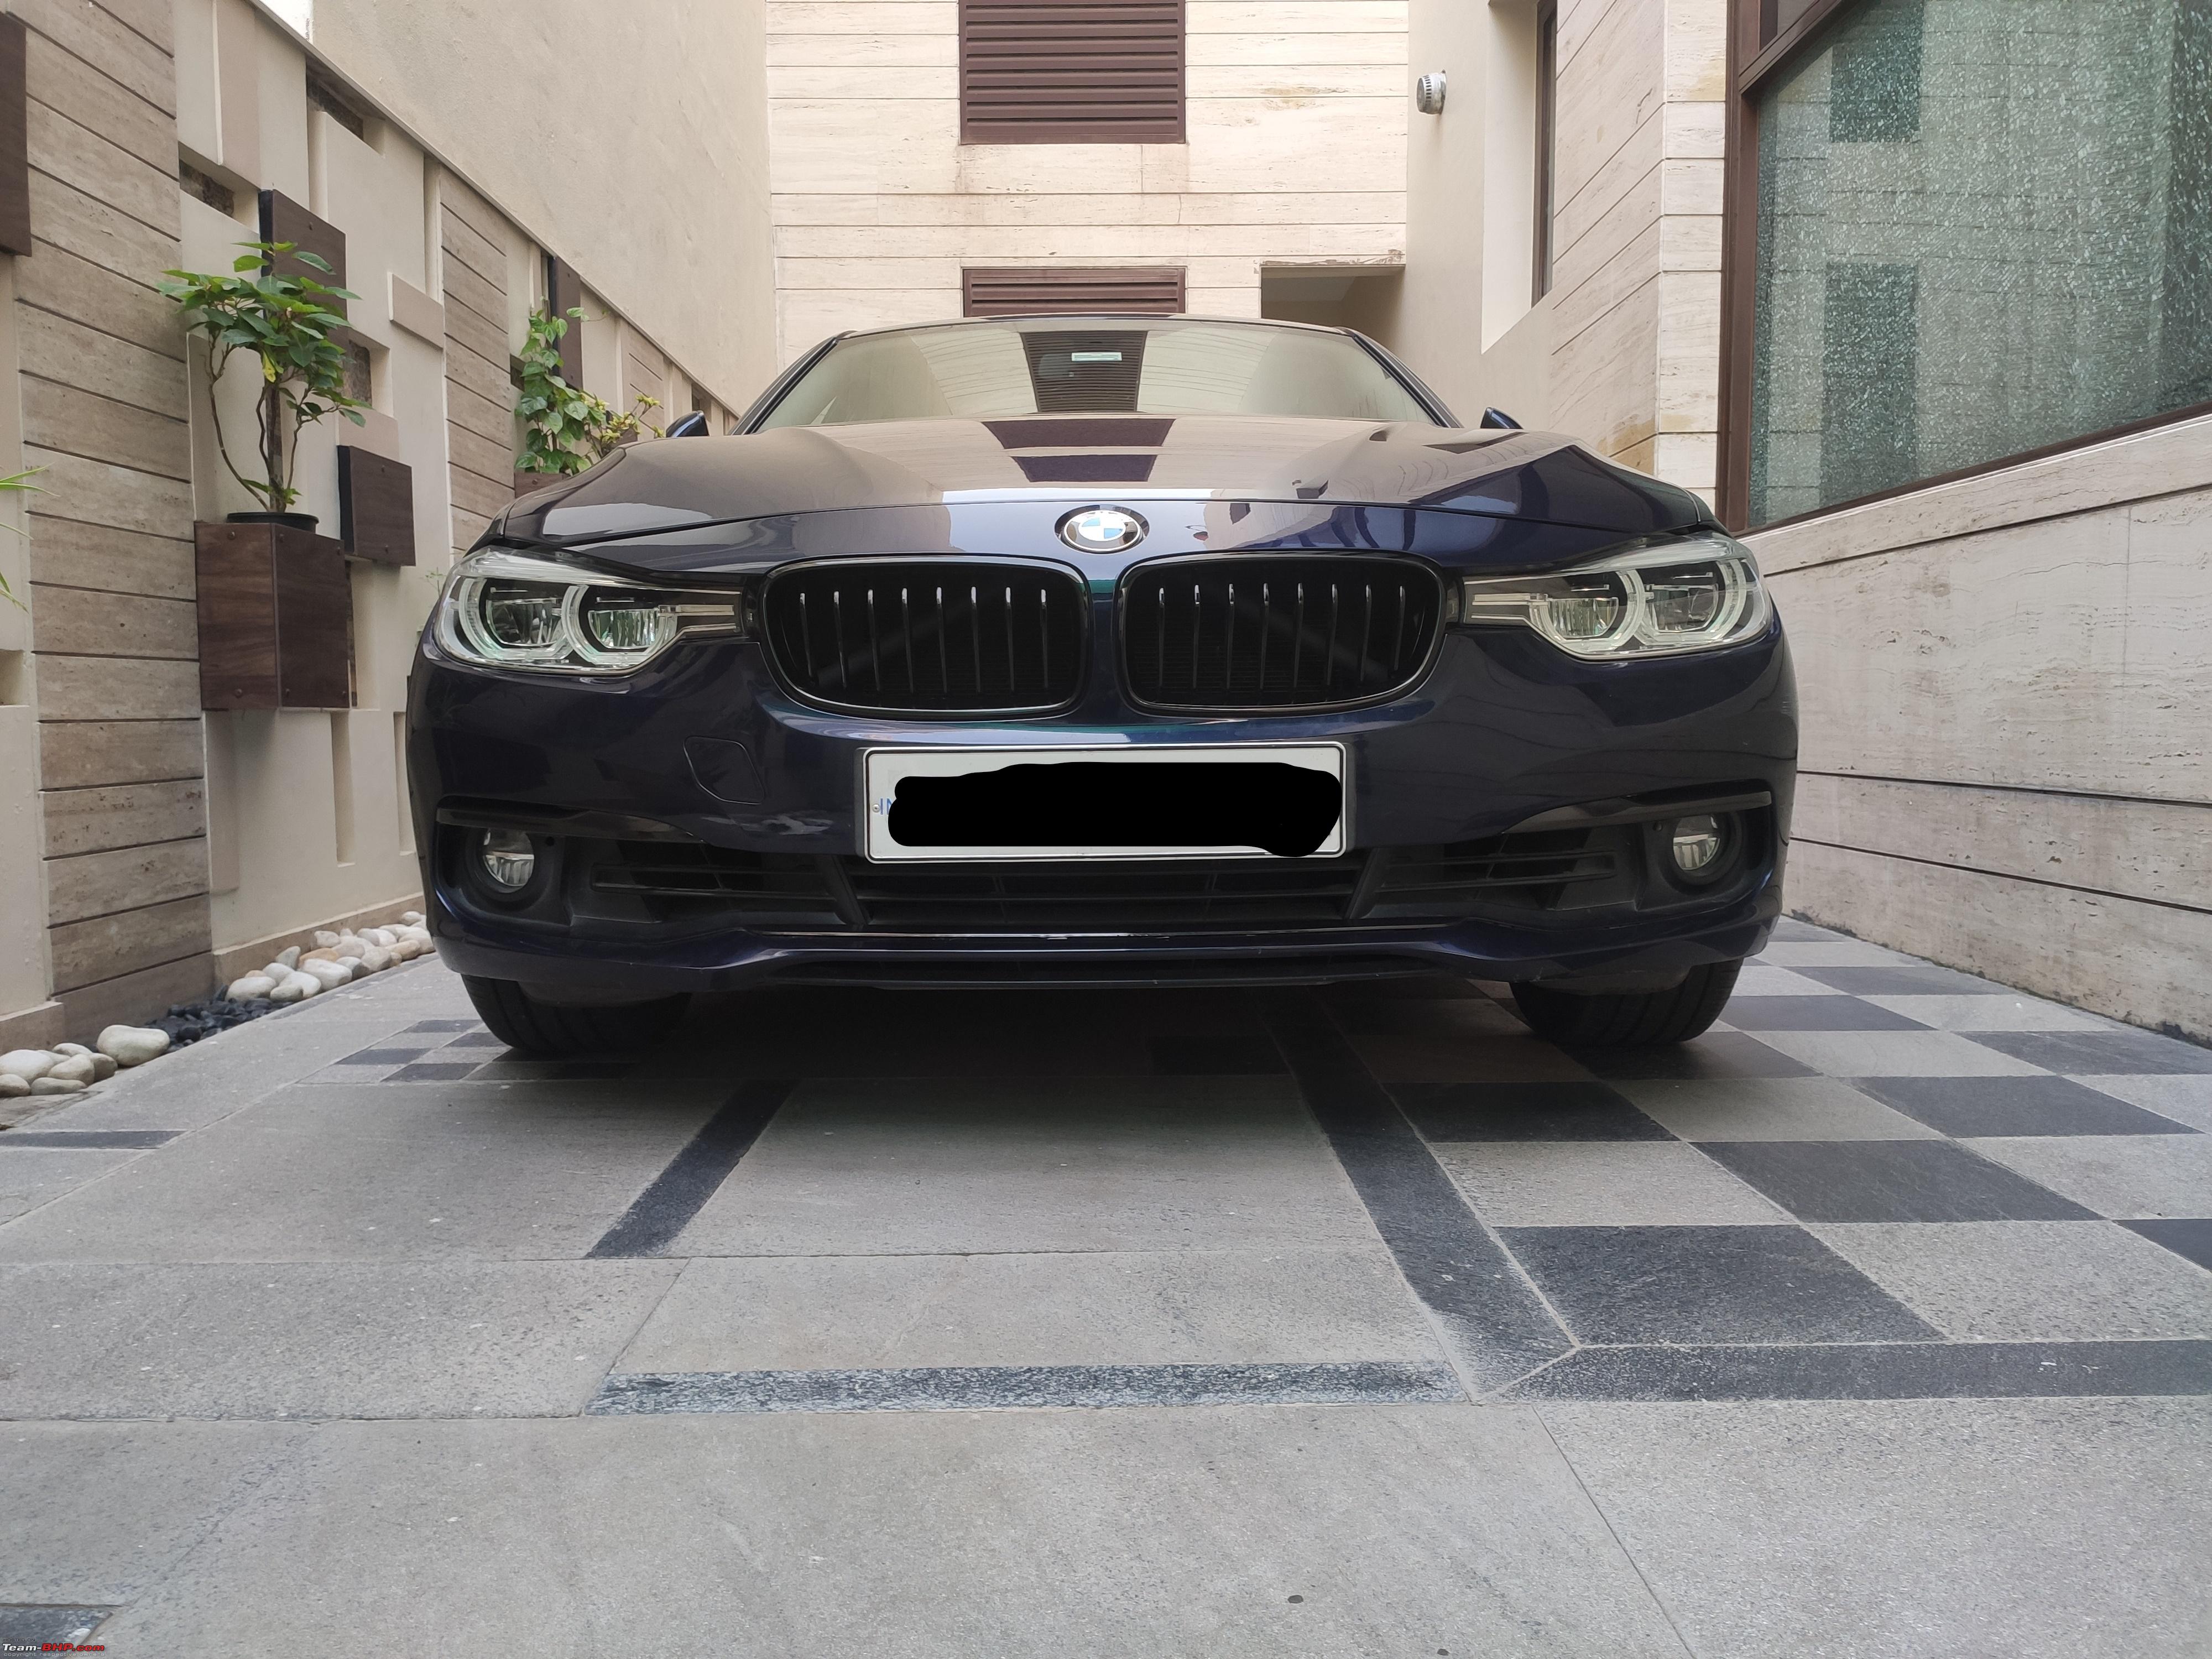 F30 BMW 3 Series: Still the best 3, tips to buy good used ones for